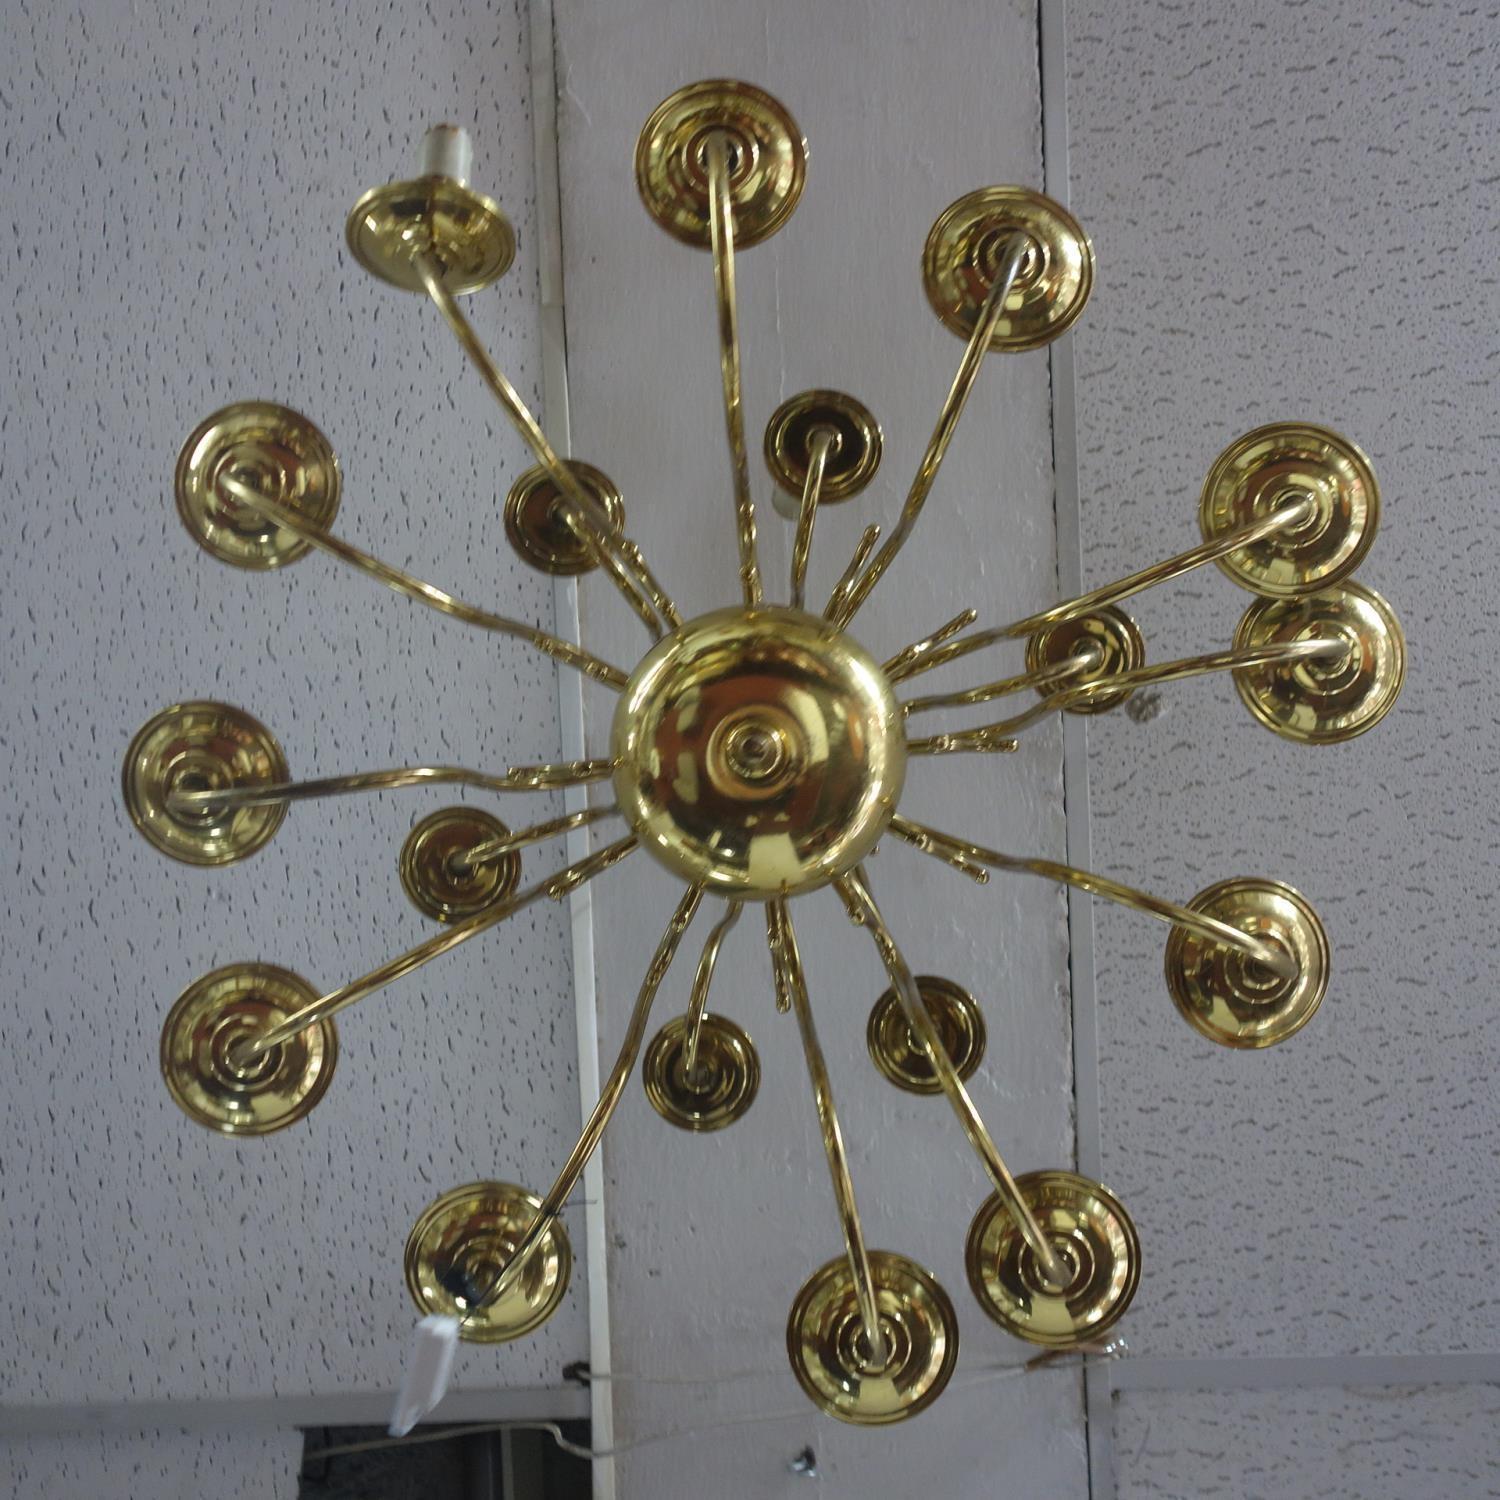 A pair of 18th century style Dutch 18 branch chandeliers - Image 3 of 4